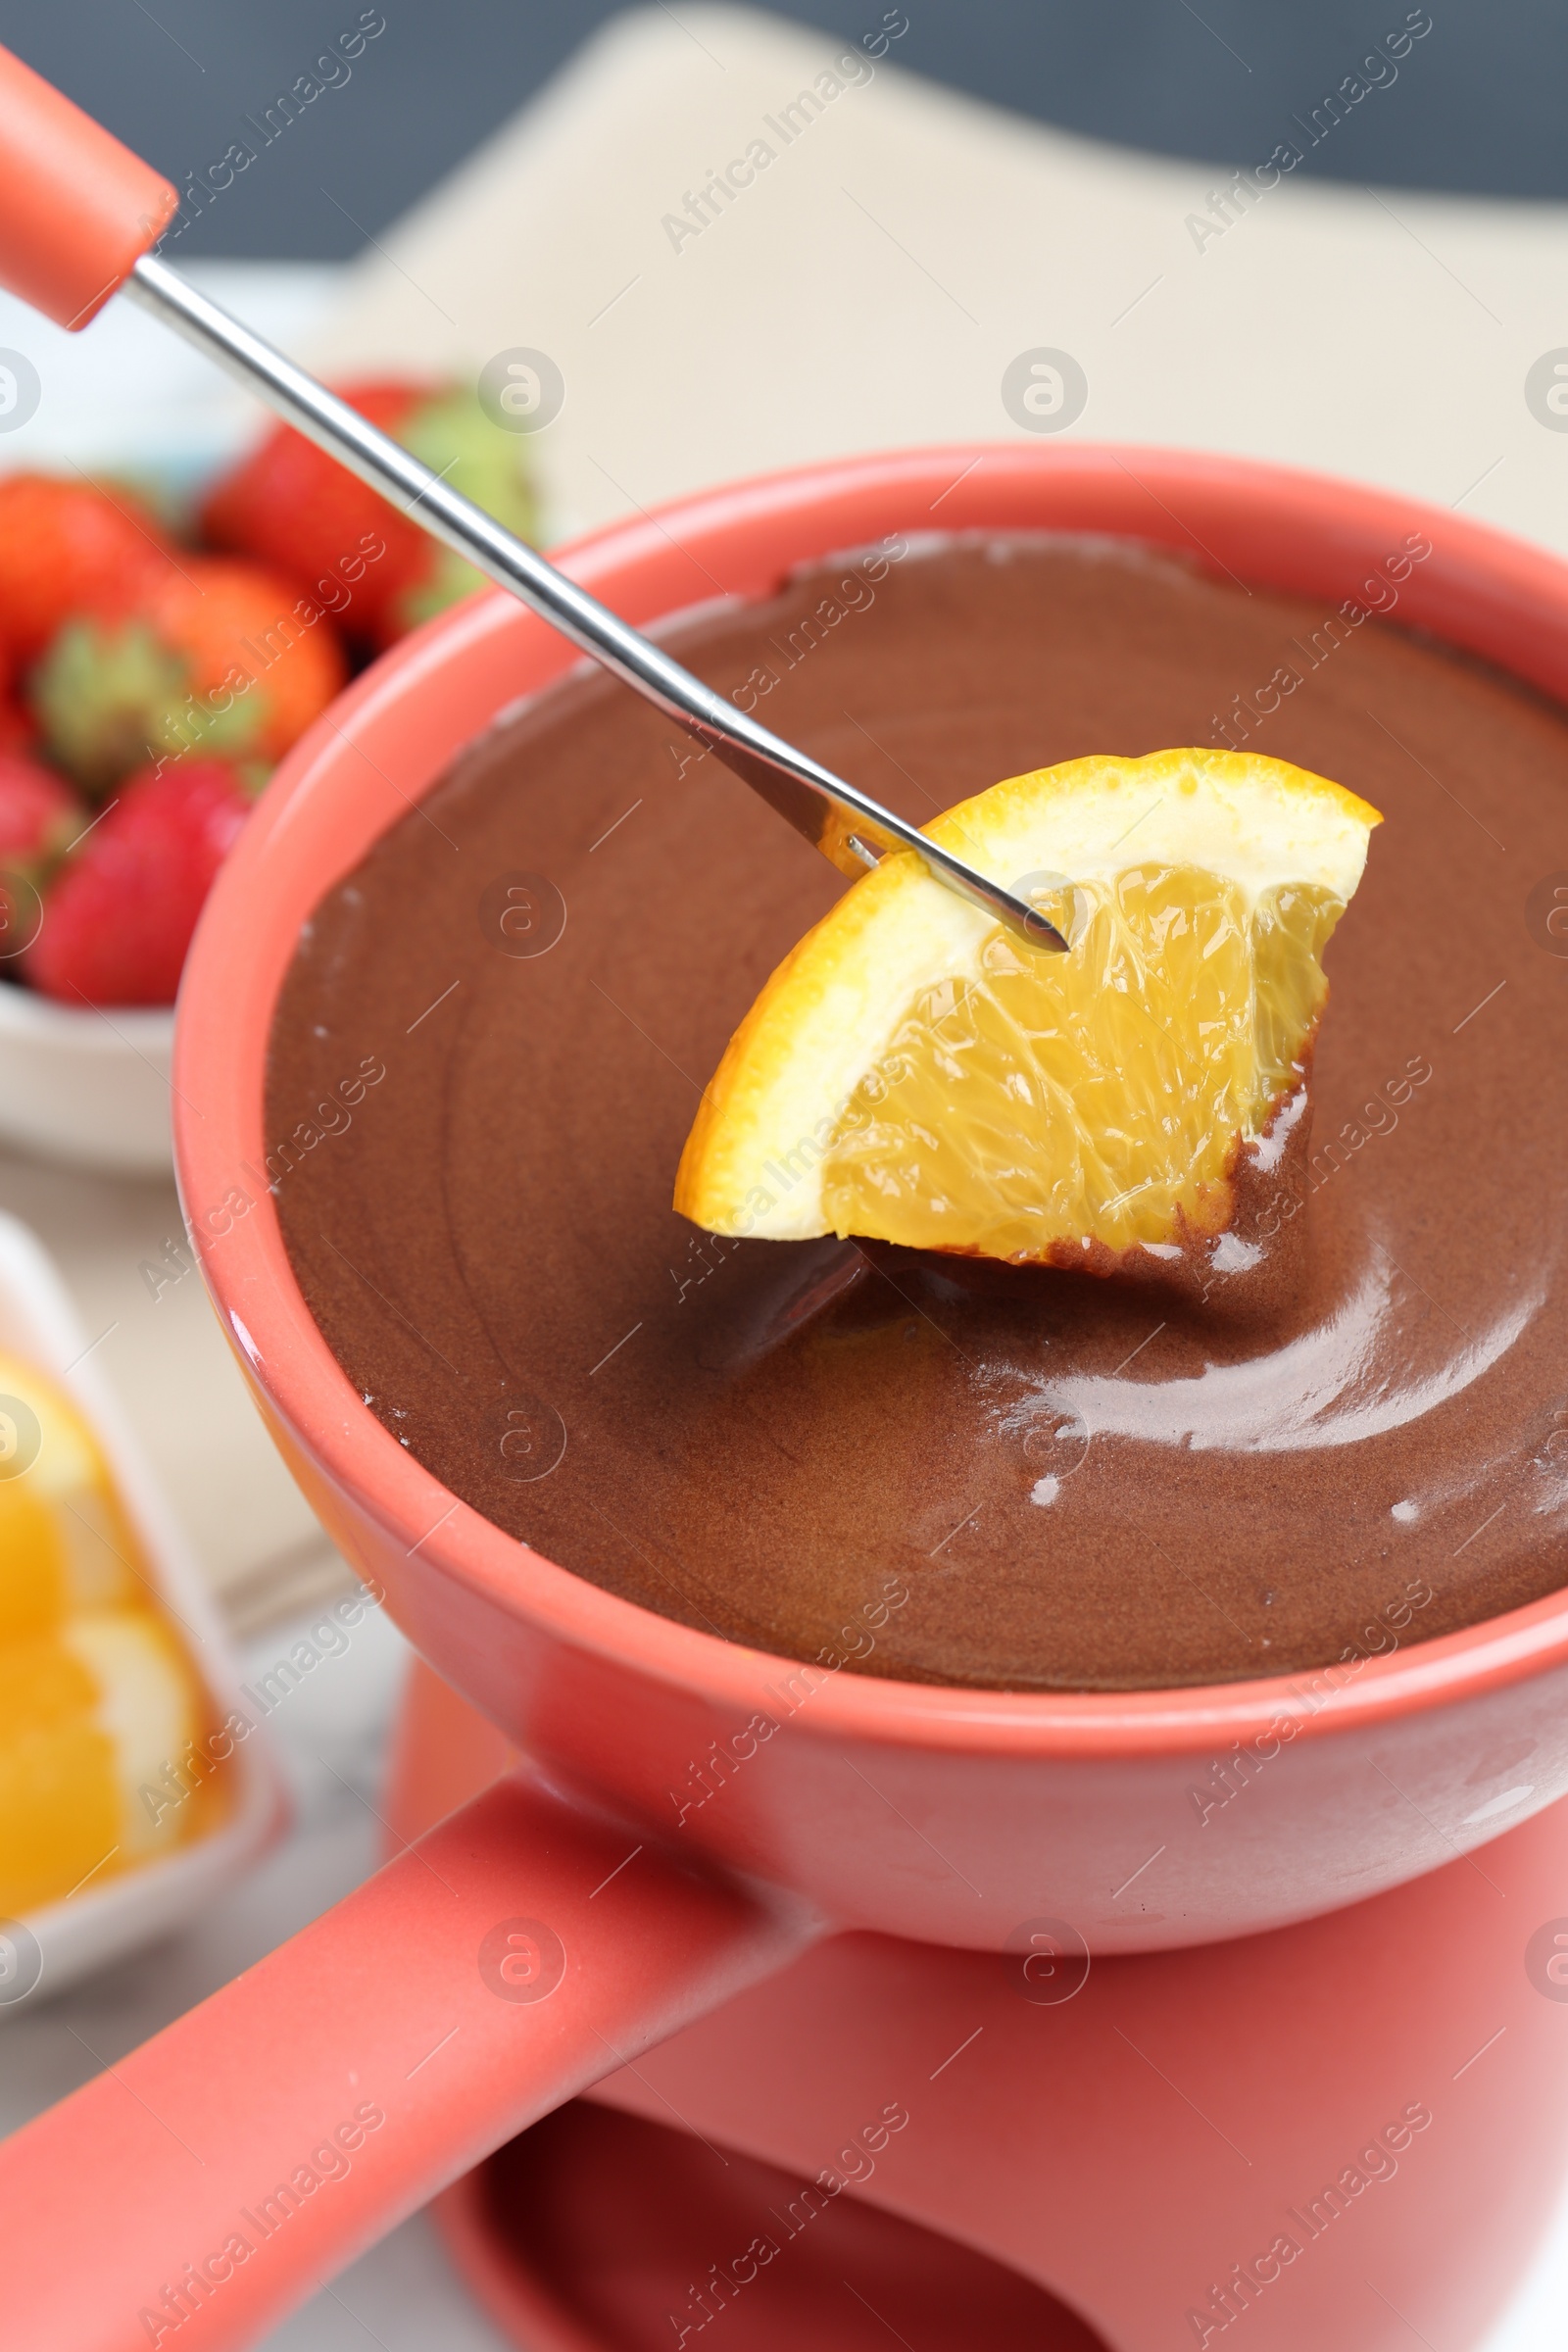 Photo of Dipping fresh orange into fondue pot with melted chocolate at table, closeup